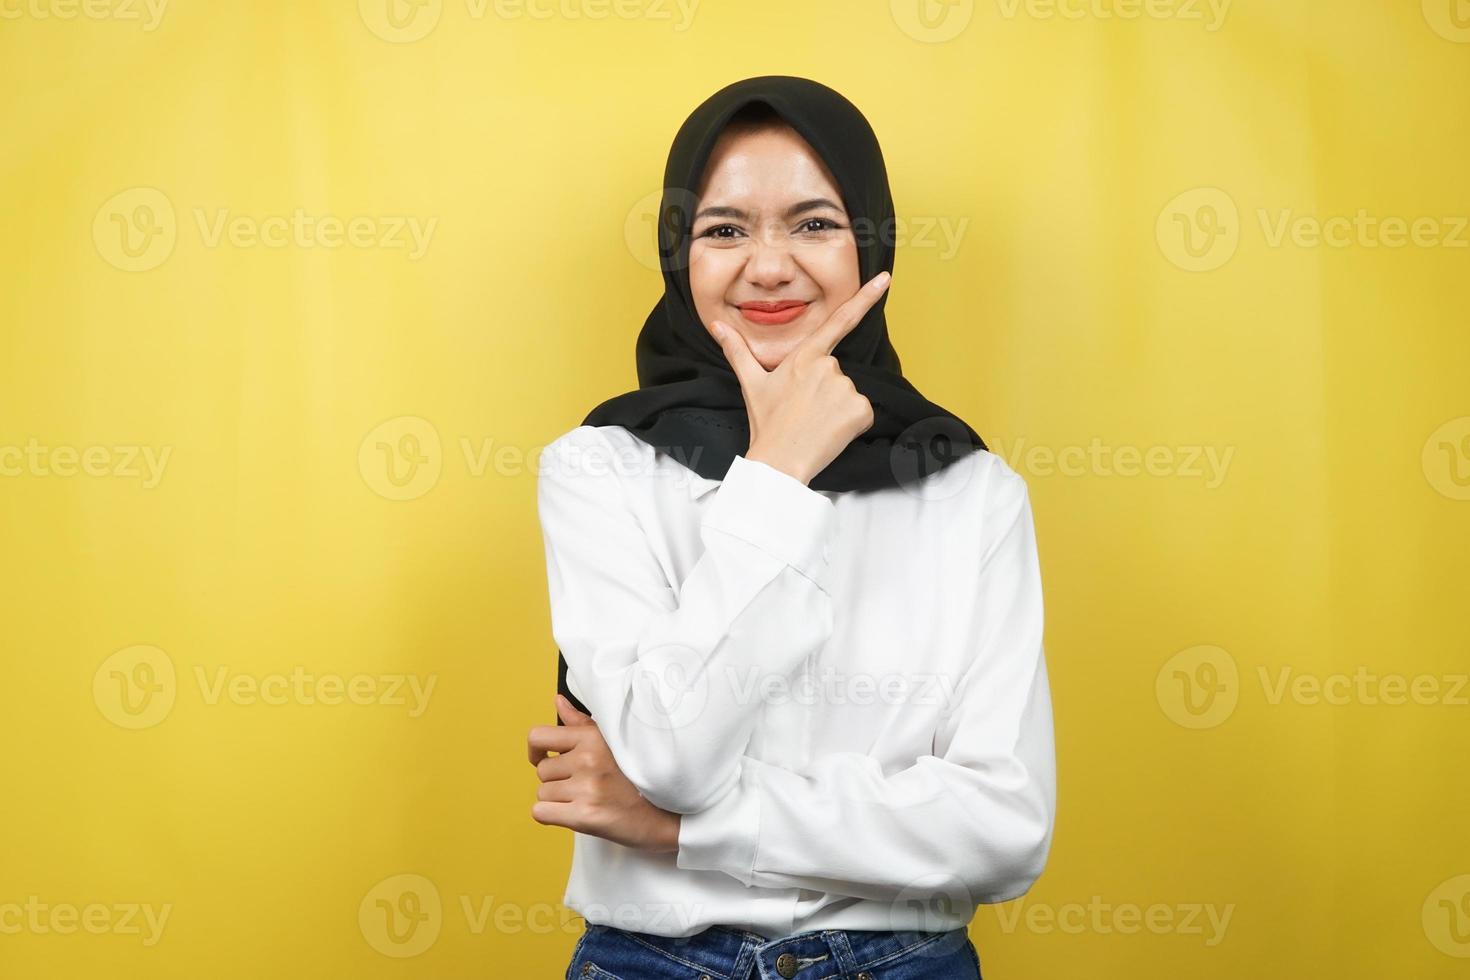 Beautiful young asian muslim woman smiling confident, enthusiastic and cheerful with hands V sign on chin isolated on yellow background photo